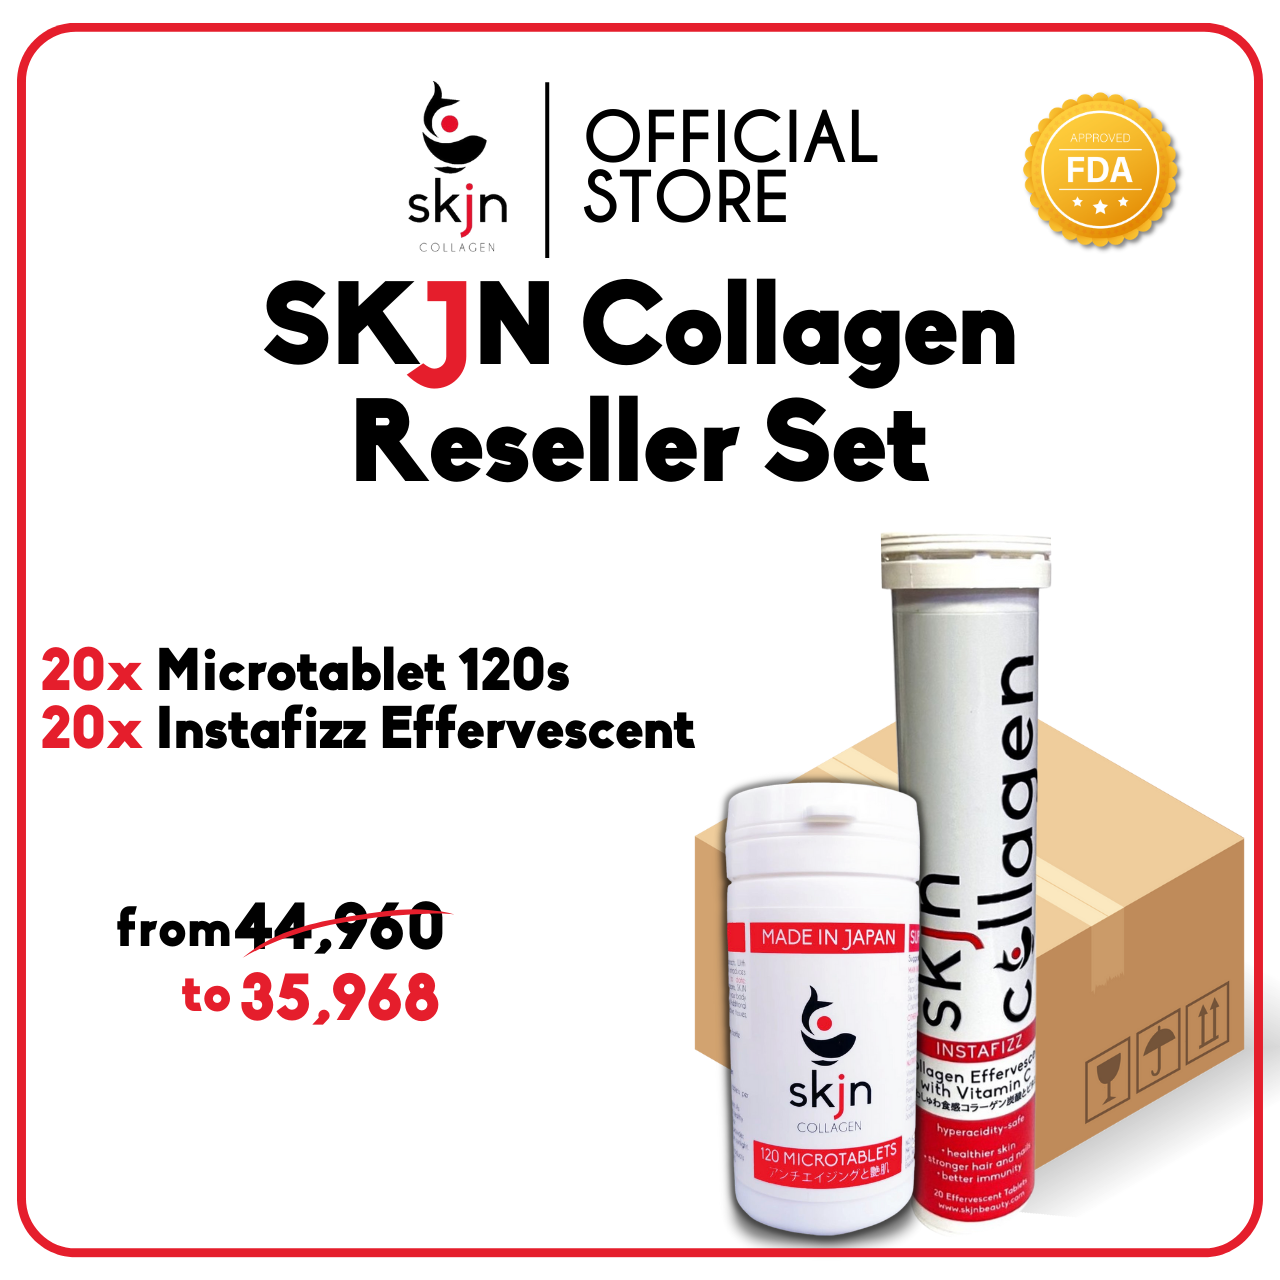 Reseller Set A: Get 20% off on 20 Microtablet 120s and 20 Instafizz